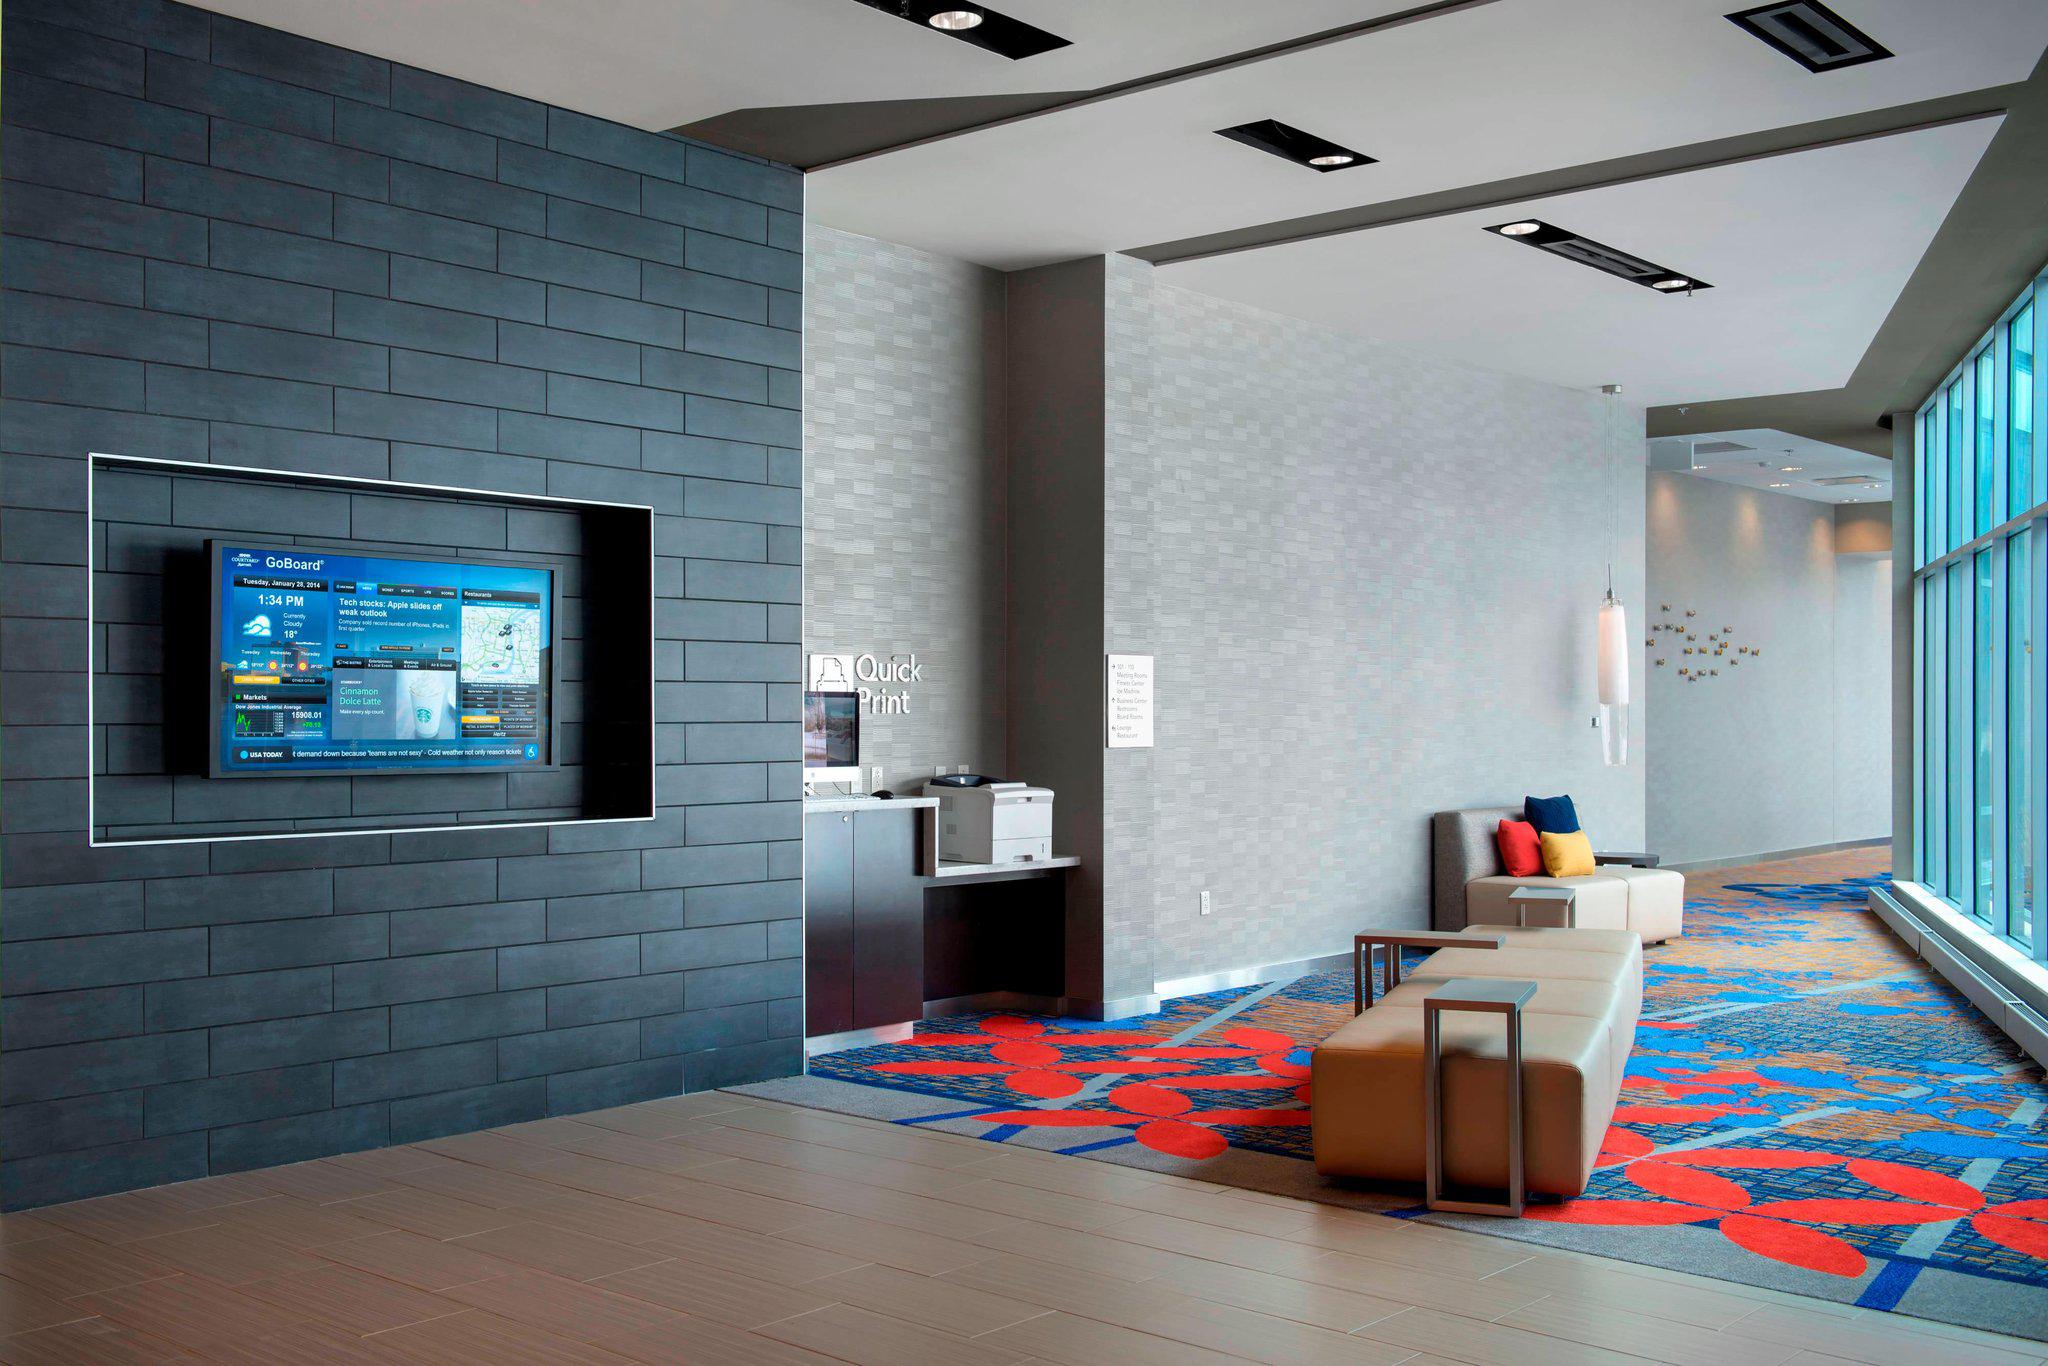 Courtyard by Marriott Philadelphia South at The Navy Yard Photo